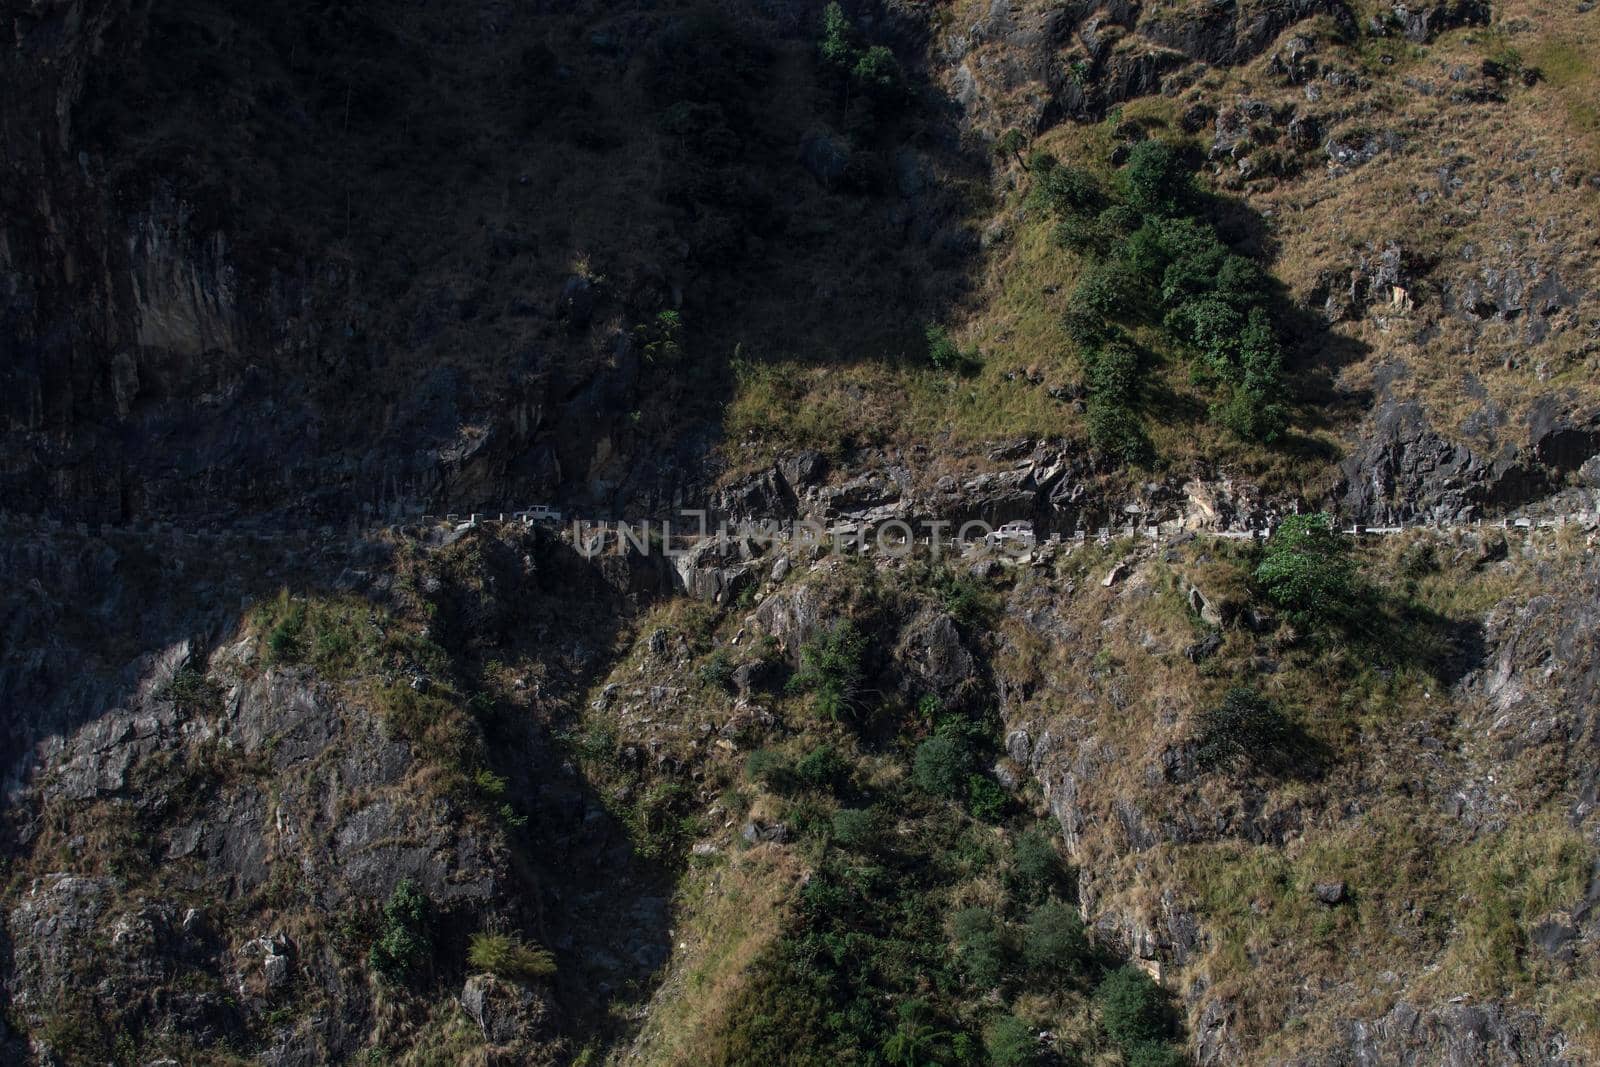 Two cars driving close to a steep edge on the road to Manang, Annapurna circuit, Nepal